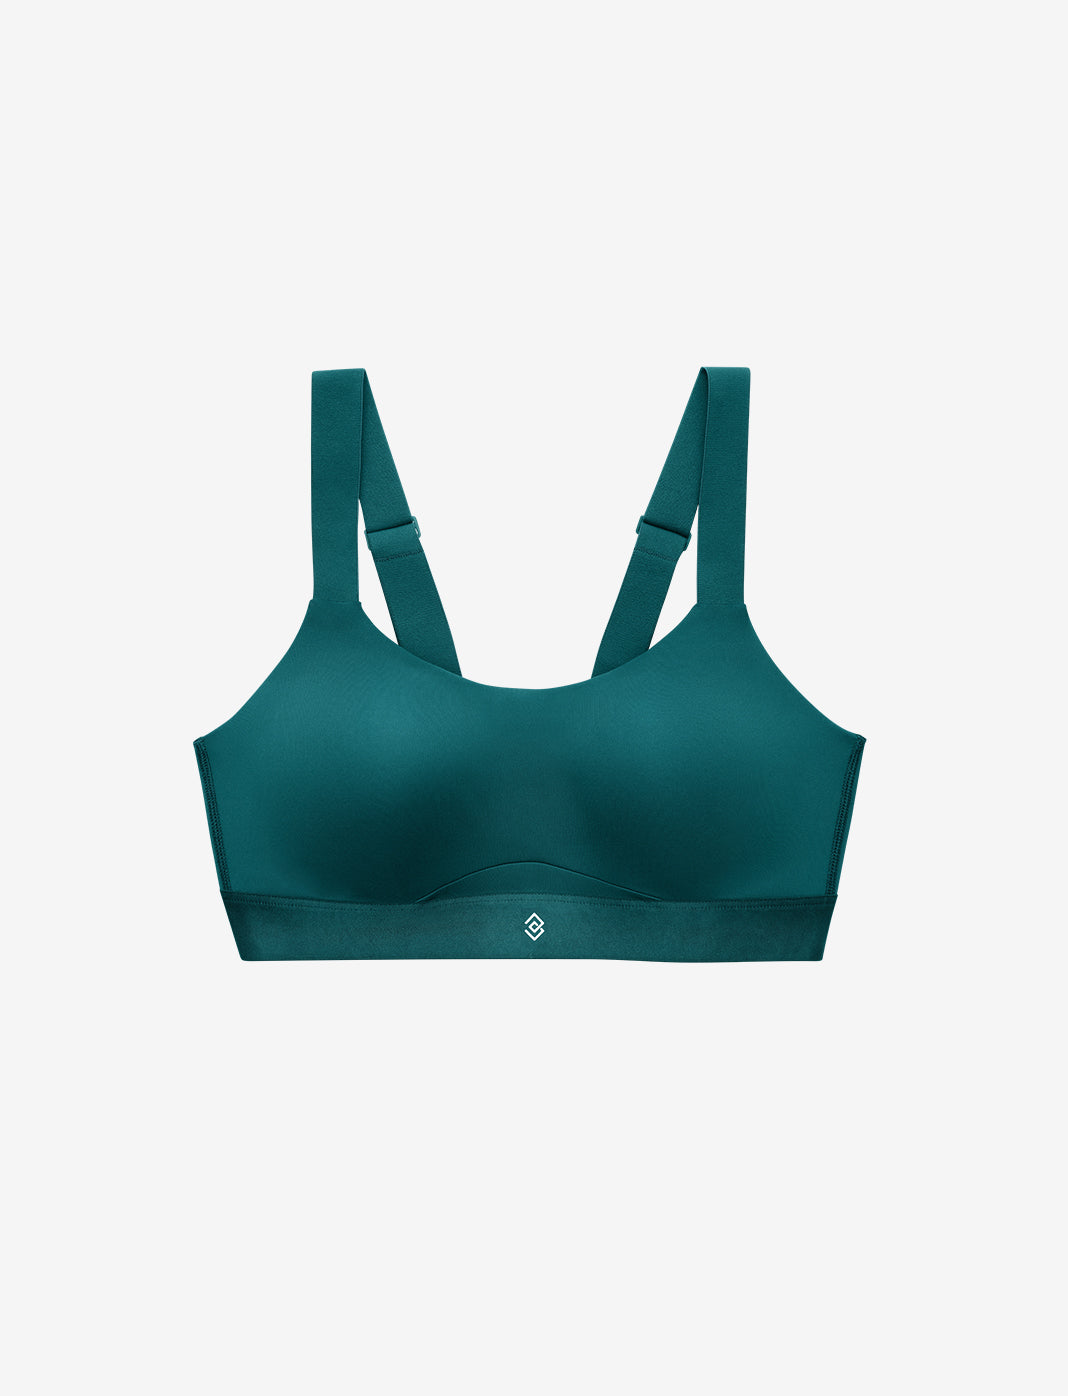 Best Women's Sports Bras - Most Comfortable & Supportive Sports